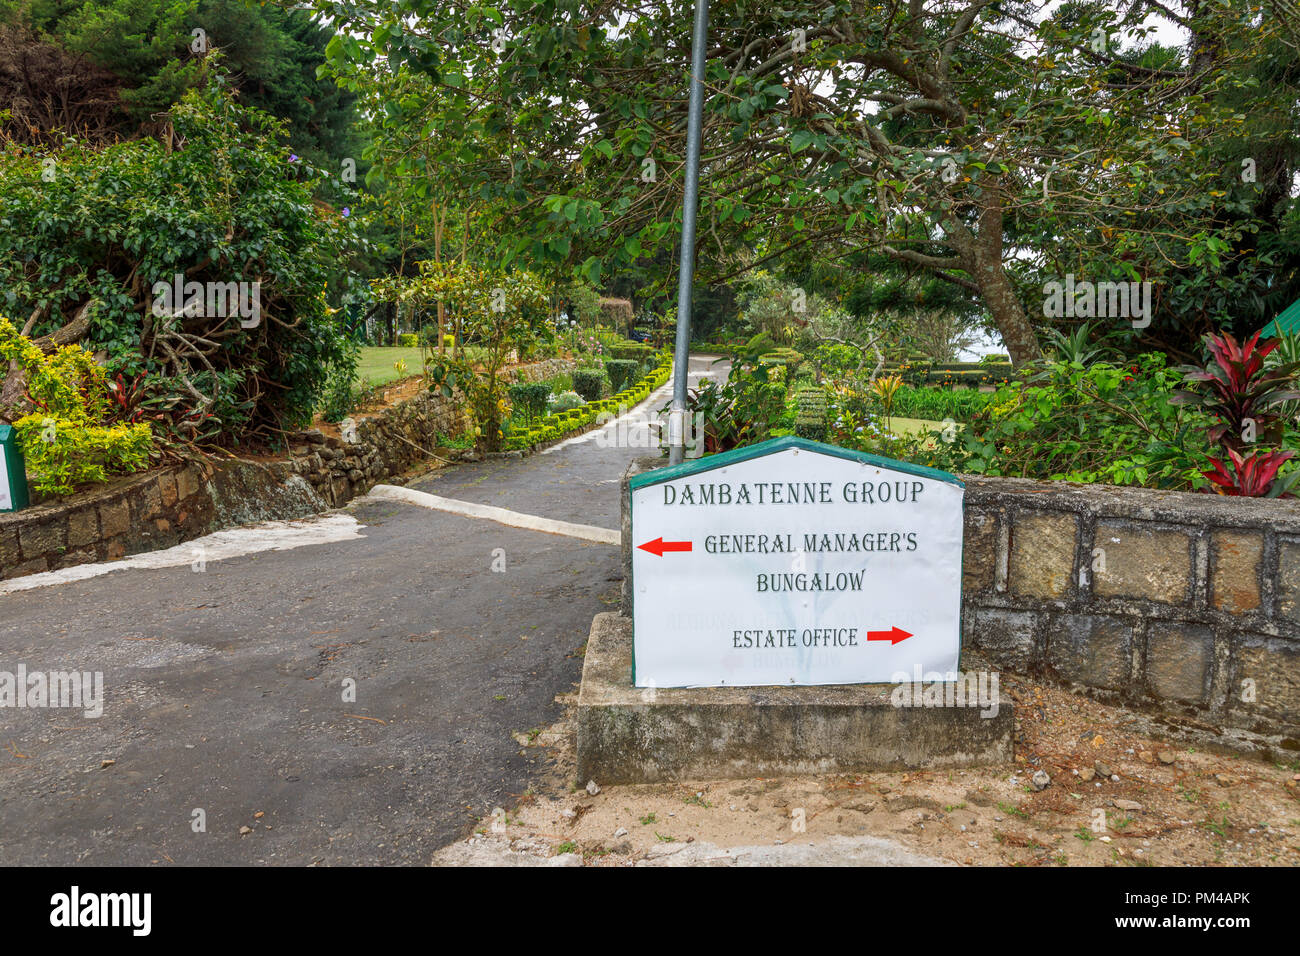 Dambatenne Group direction sign at the entrance to the garden to the General Manager's Bungalow (Lipton's Bungalow), Haputale, Uva District, Sri Lanka Stock Photo